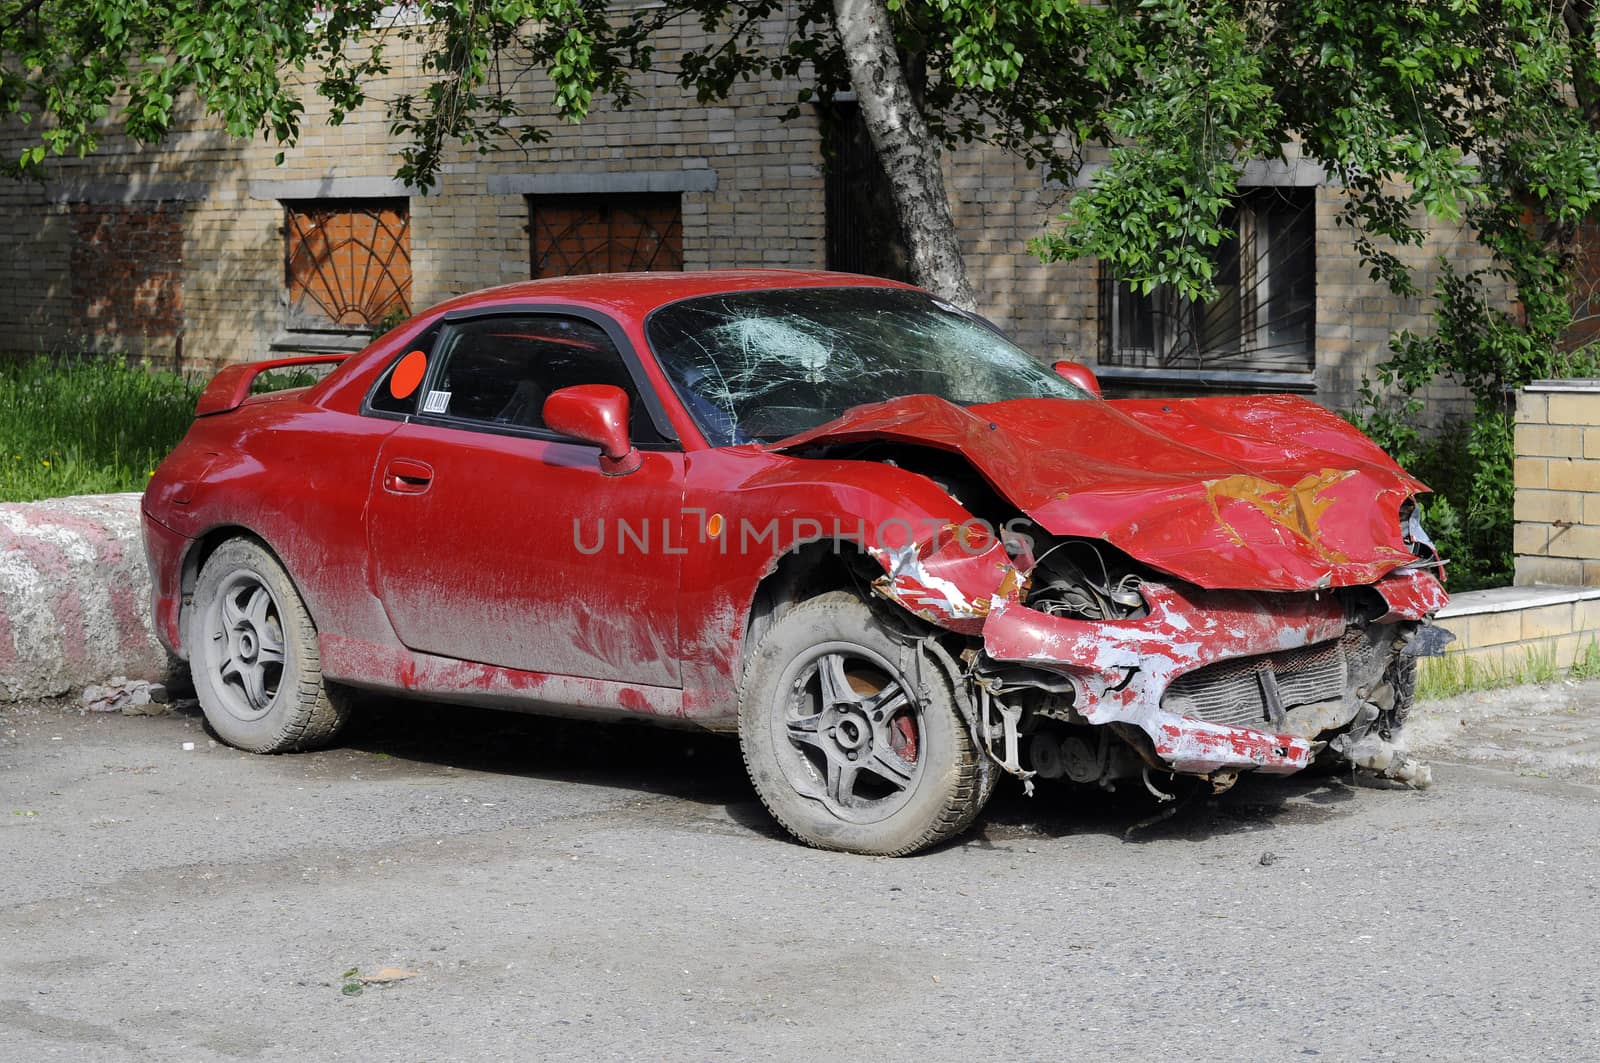 The red broken car after accident